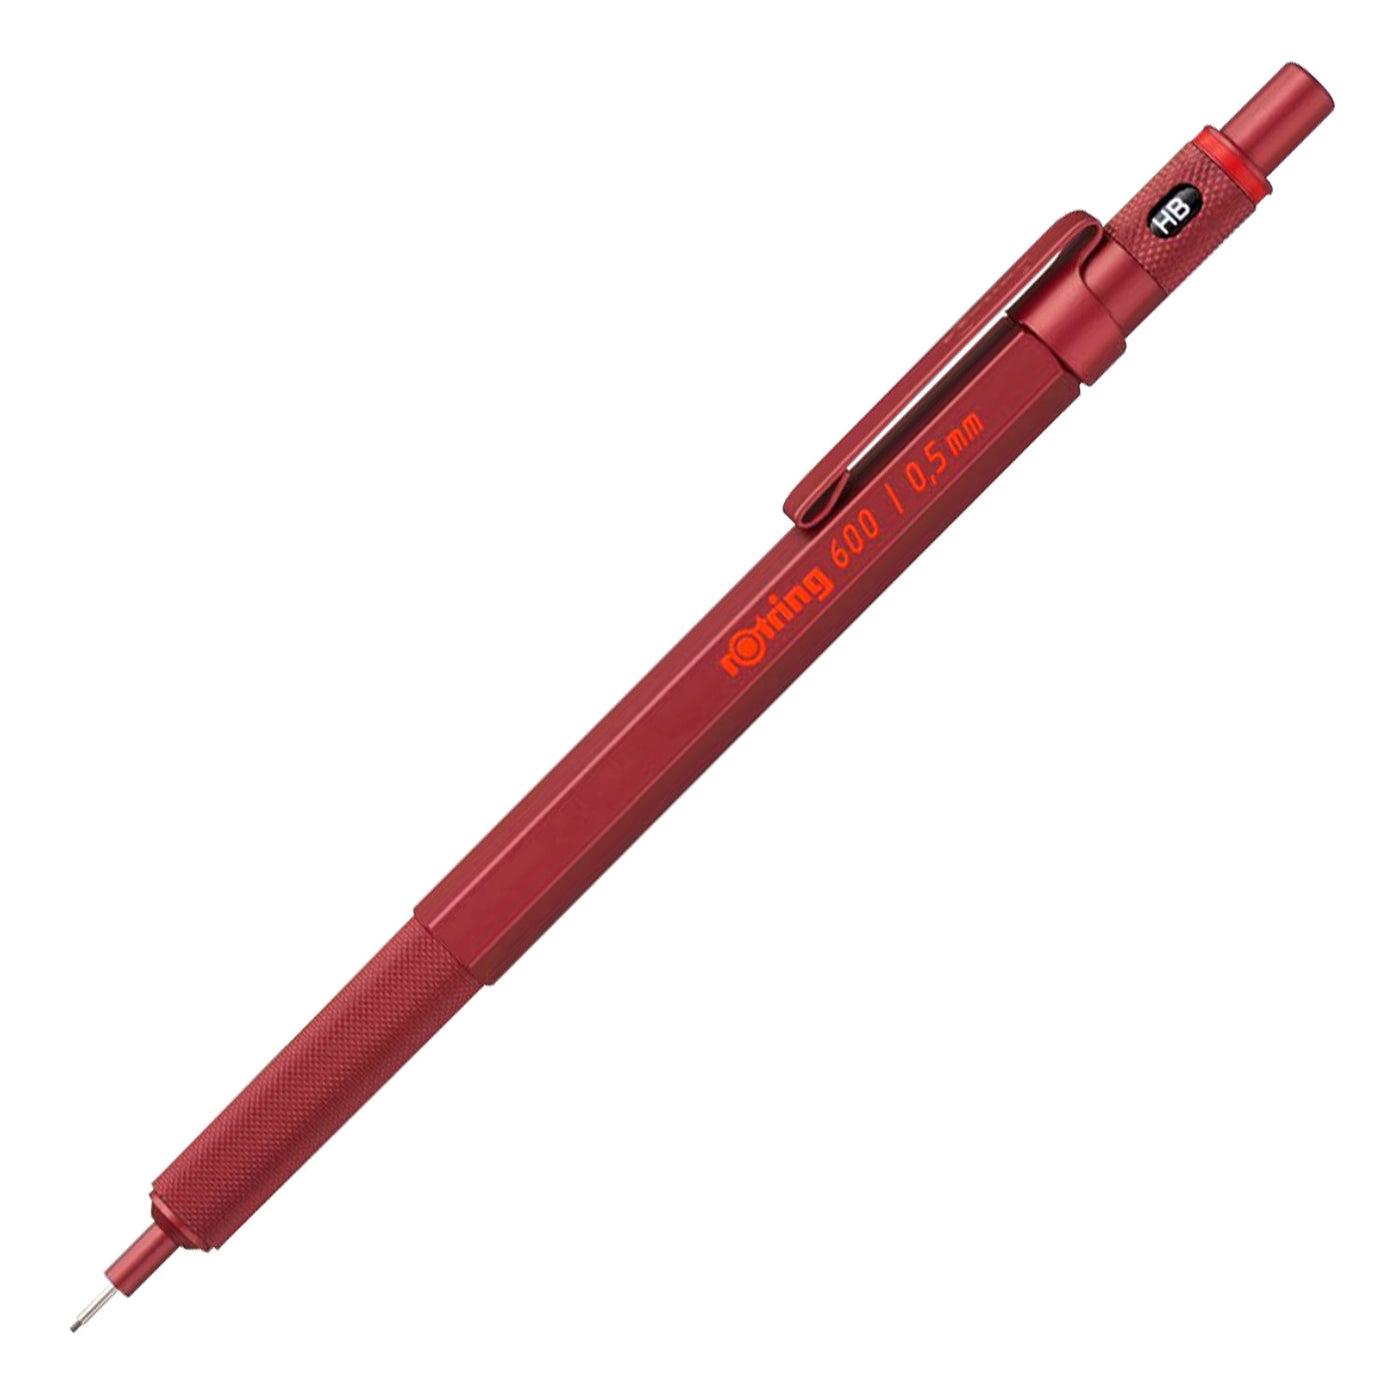 Rotring 600 0.5mm Mechanical Pencil - Red 1